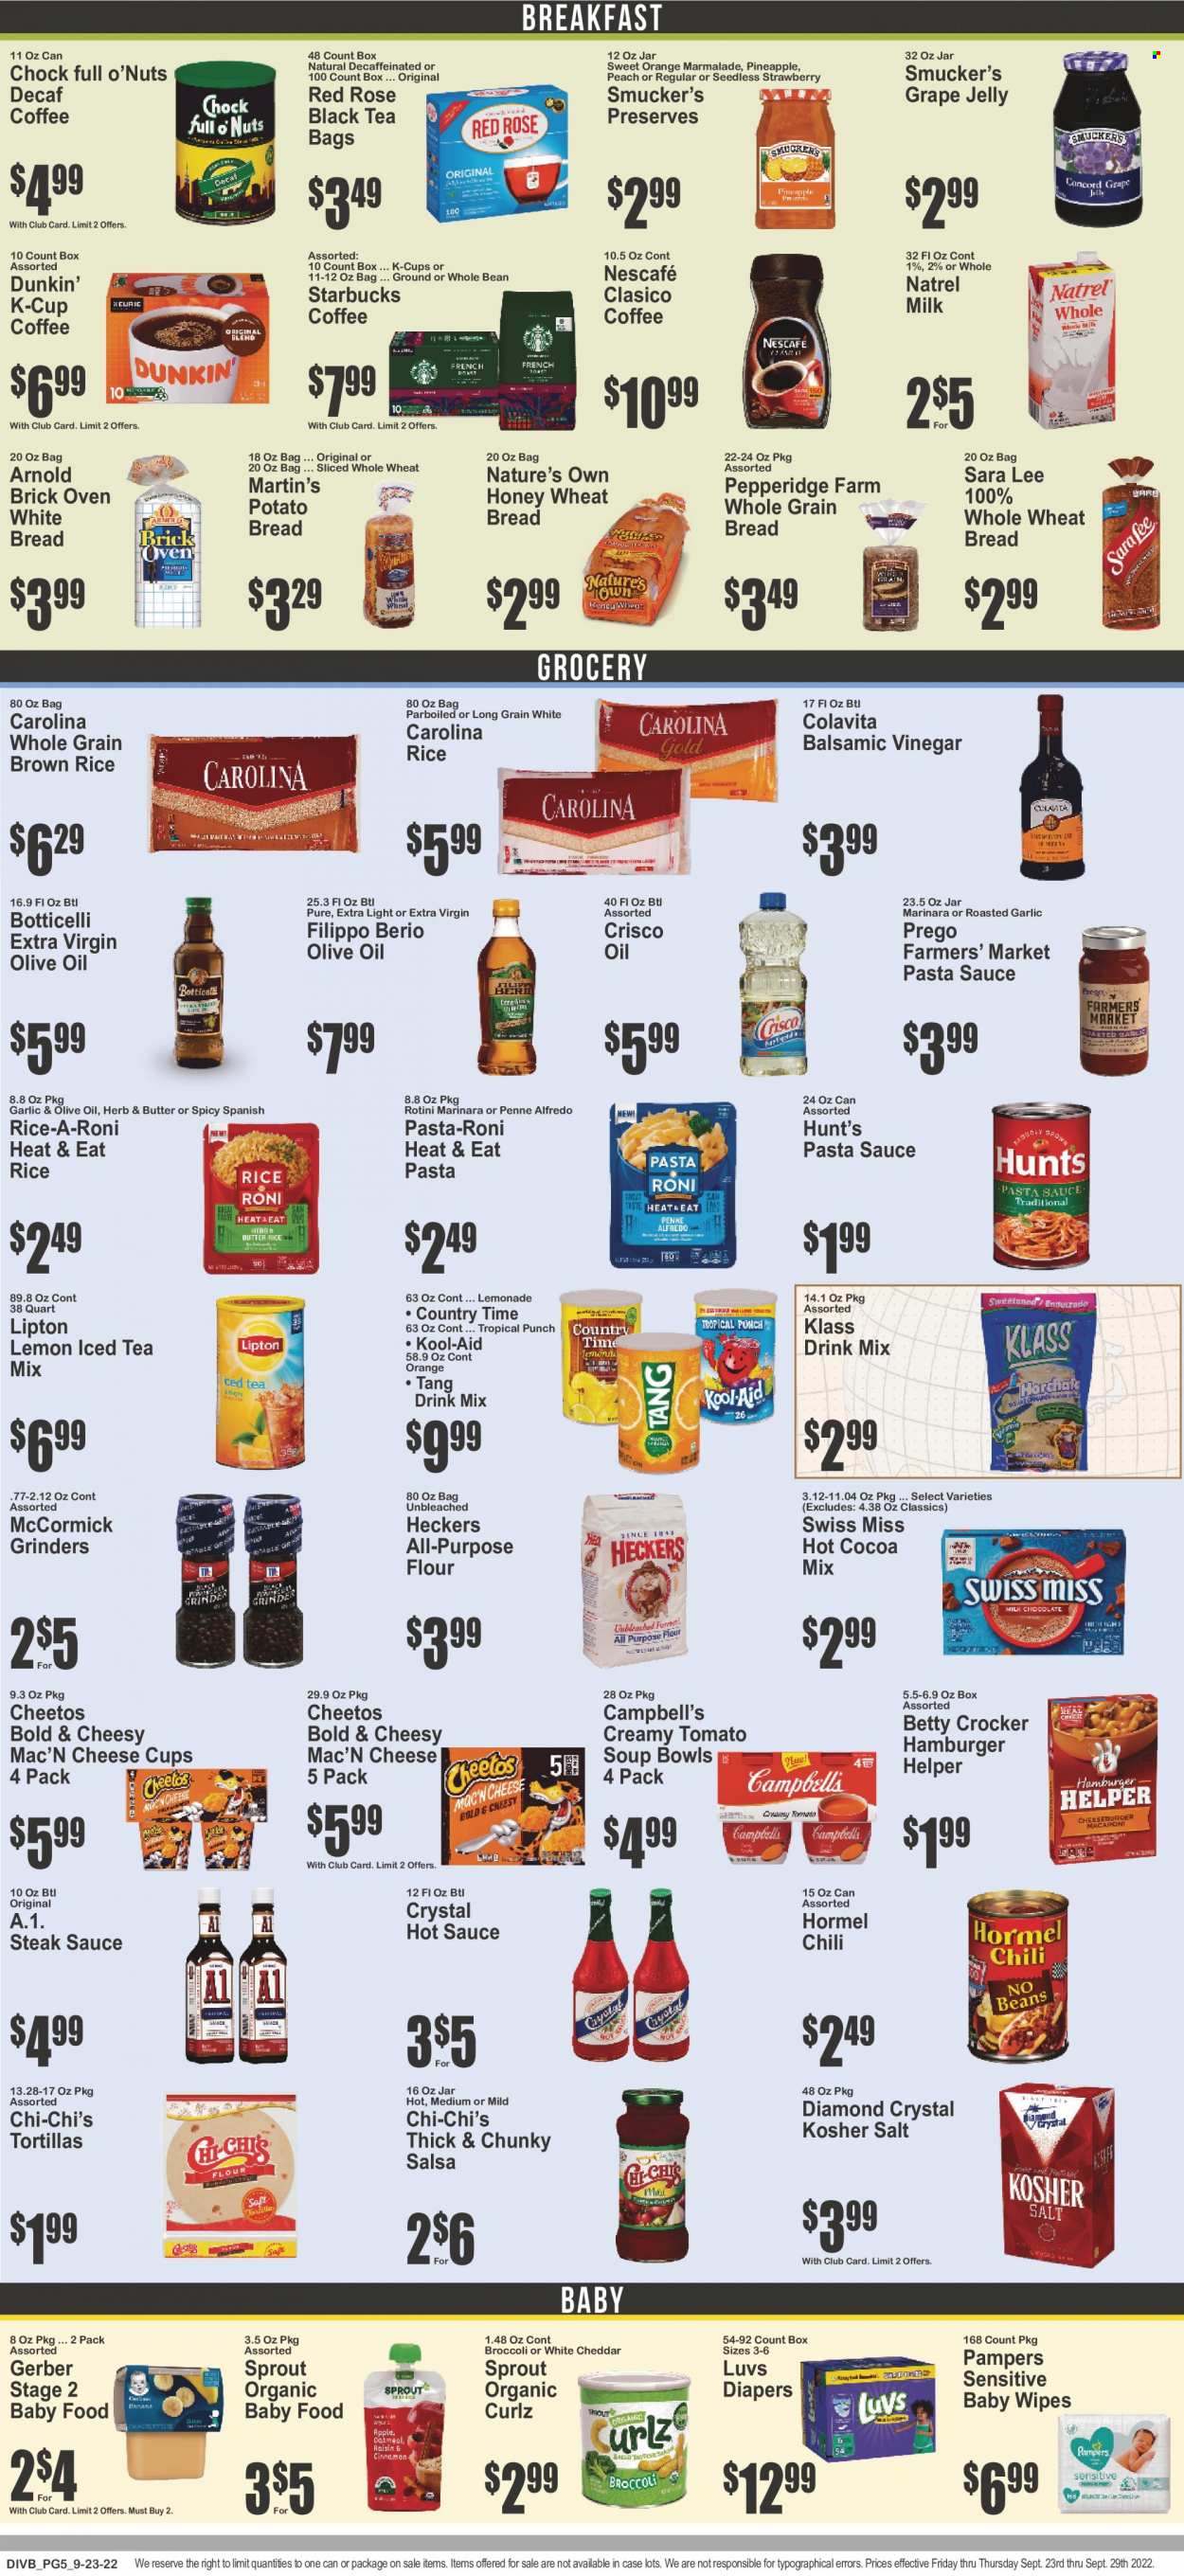 thumbnail - Food Universe Flyer - 09/23/2022 - 09/29/2022 - Sales products - tortillas, wheat bread, white bread, Sara Lee, broccoli, pineapple, oranges, Campbell's, tomato soup, pasta sauce, soup, sauce, Hormel, cheddar, cheese cup, cheese, Swiss Miss, milk, butter, jelly, Gerber, Cheetos, Crisco, brown rice, rice, penne, steak sauce, hot sauce, salsa, balsamic vinegar, extra virgin olive oil, vinegar, olive oil, oil, grape jelly, lemonade, Lipton, Country Time, fruit punch, hot cocoa, tea bags, coffee, Starbucks, Nescafé, coffee capsules, K-Cups, rosé wine, organic baby food, steak, wipes, Pampers, baby wipes, nappies, rose, Nature's Own. Page 5.